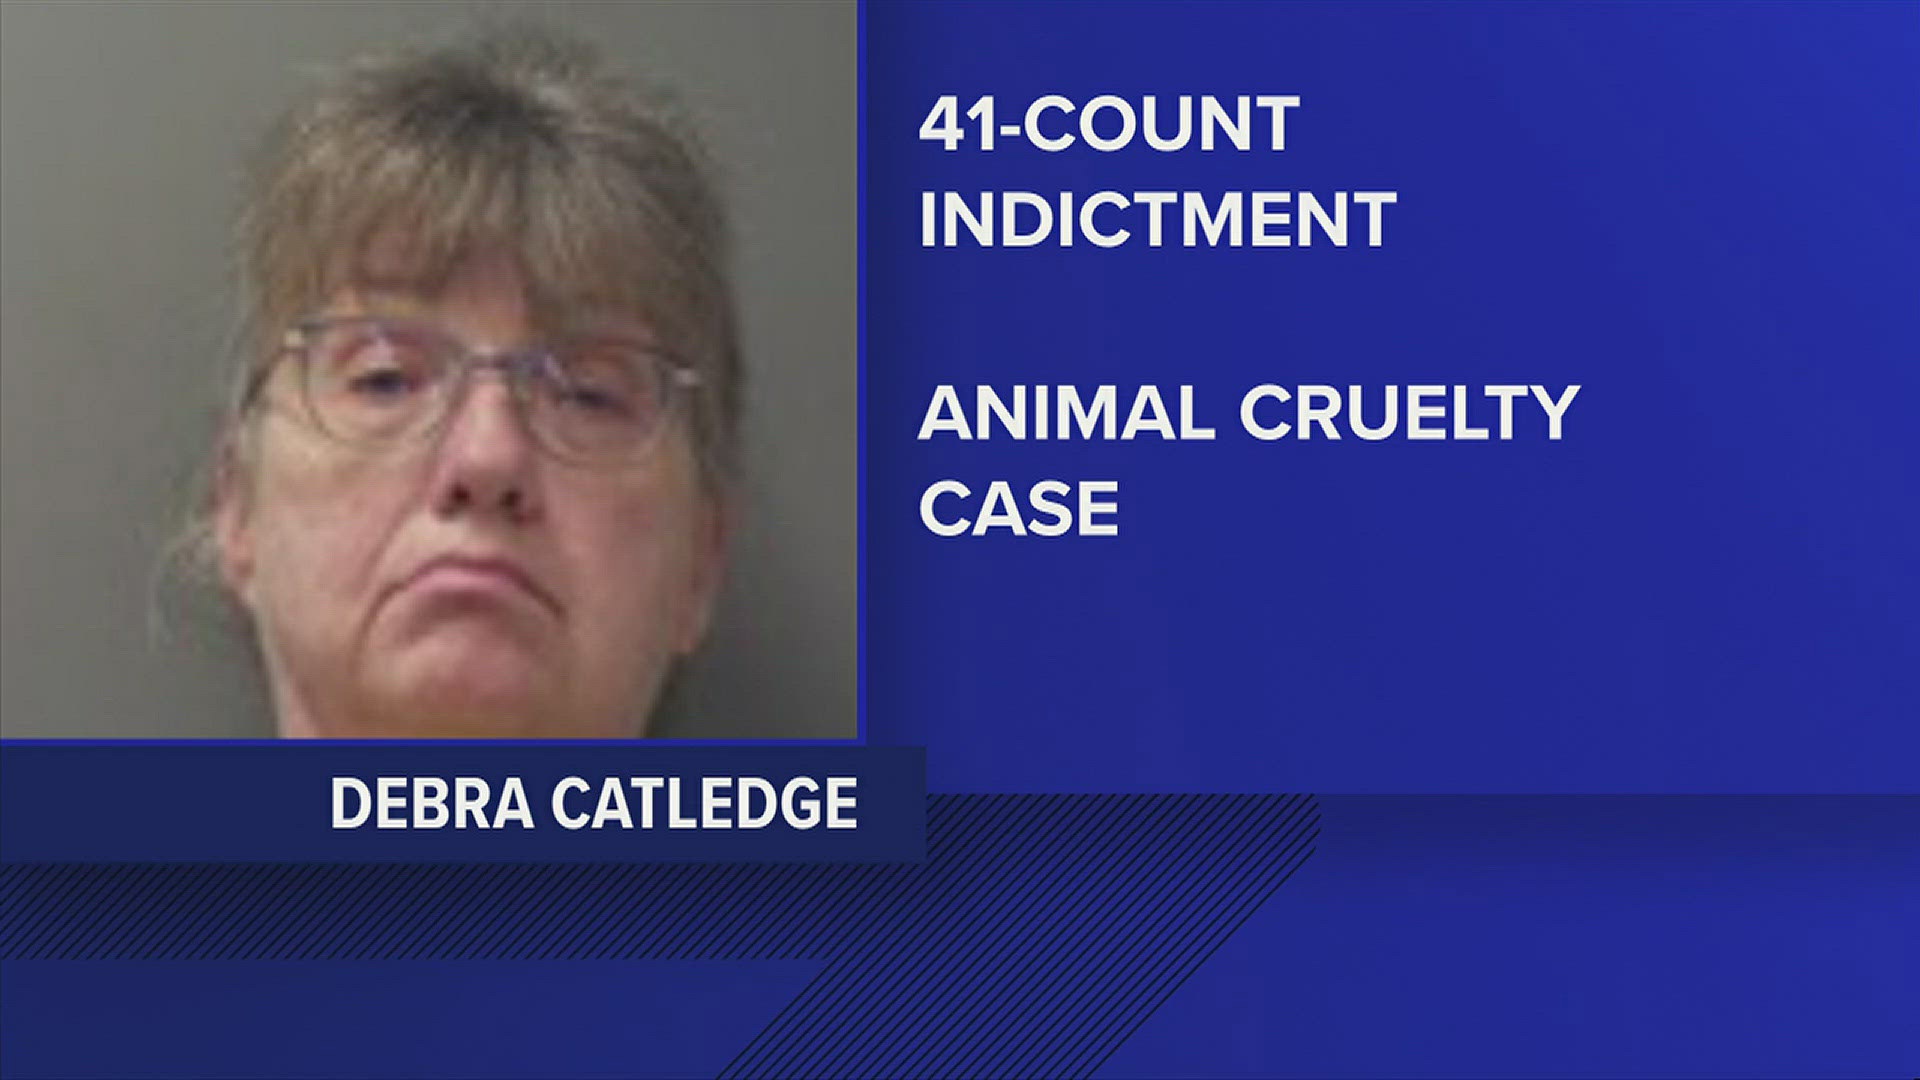 Debra Catledge is accused of leaving several dozen animals on her property to die.